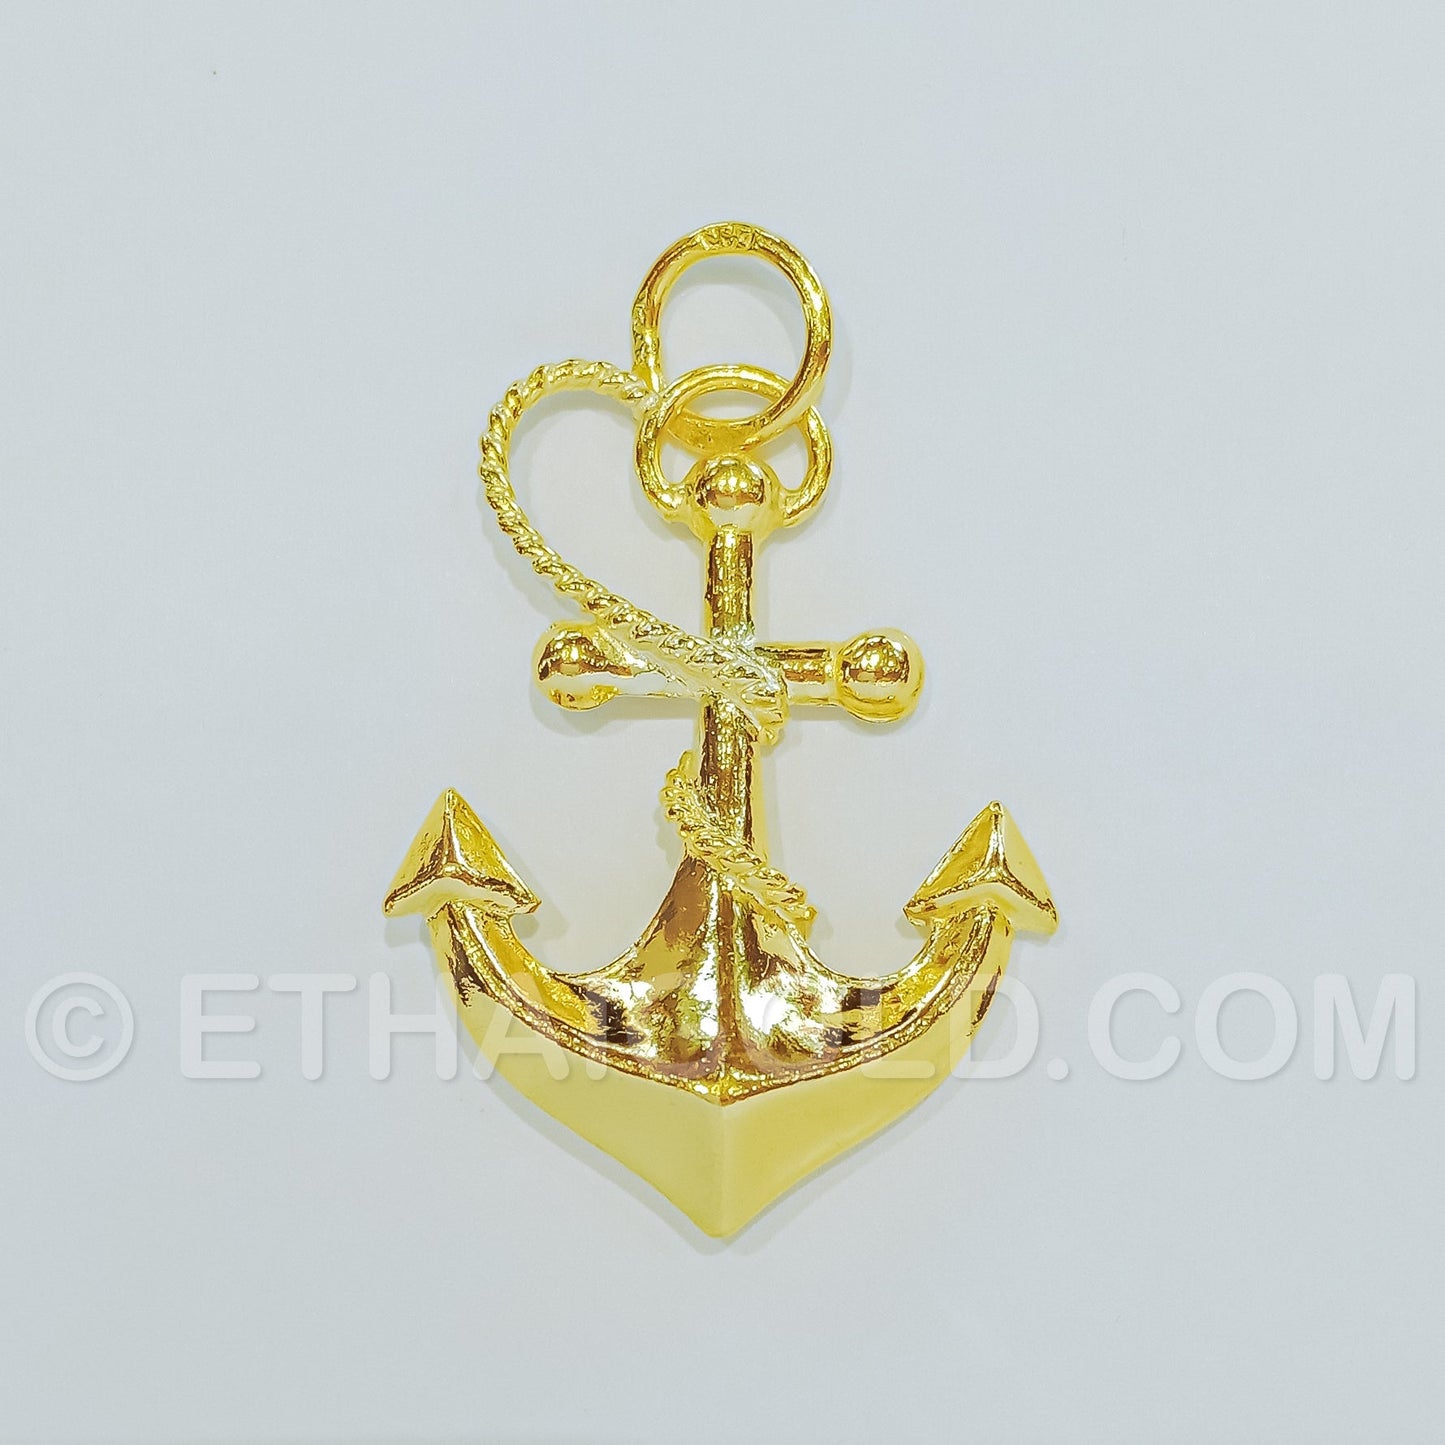 1/2 BAHT POLISHED HOLLOW ANCHOR PENDANT IN 23K GOLD (ID: P0202S)